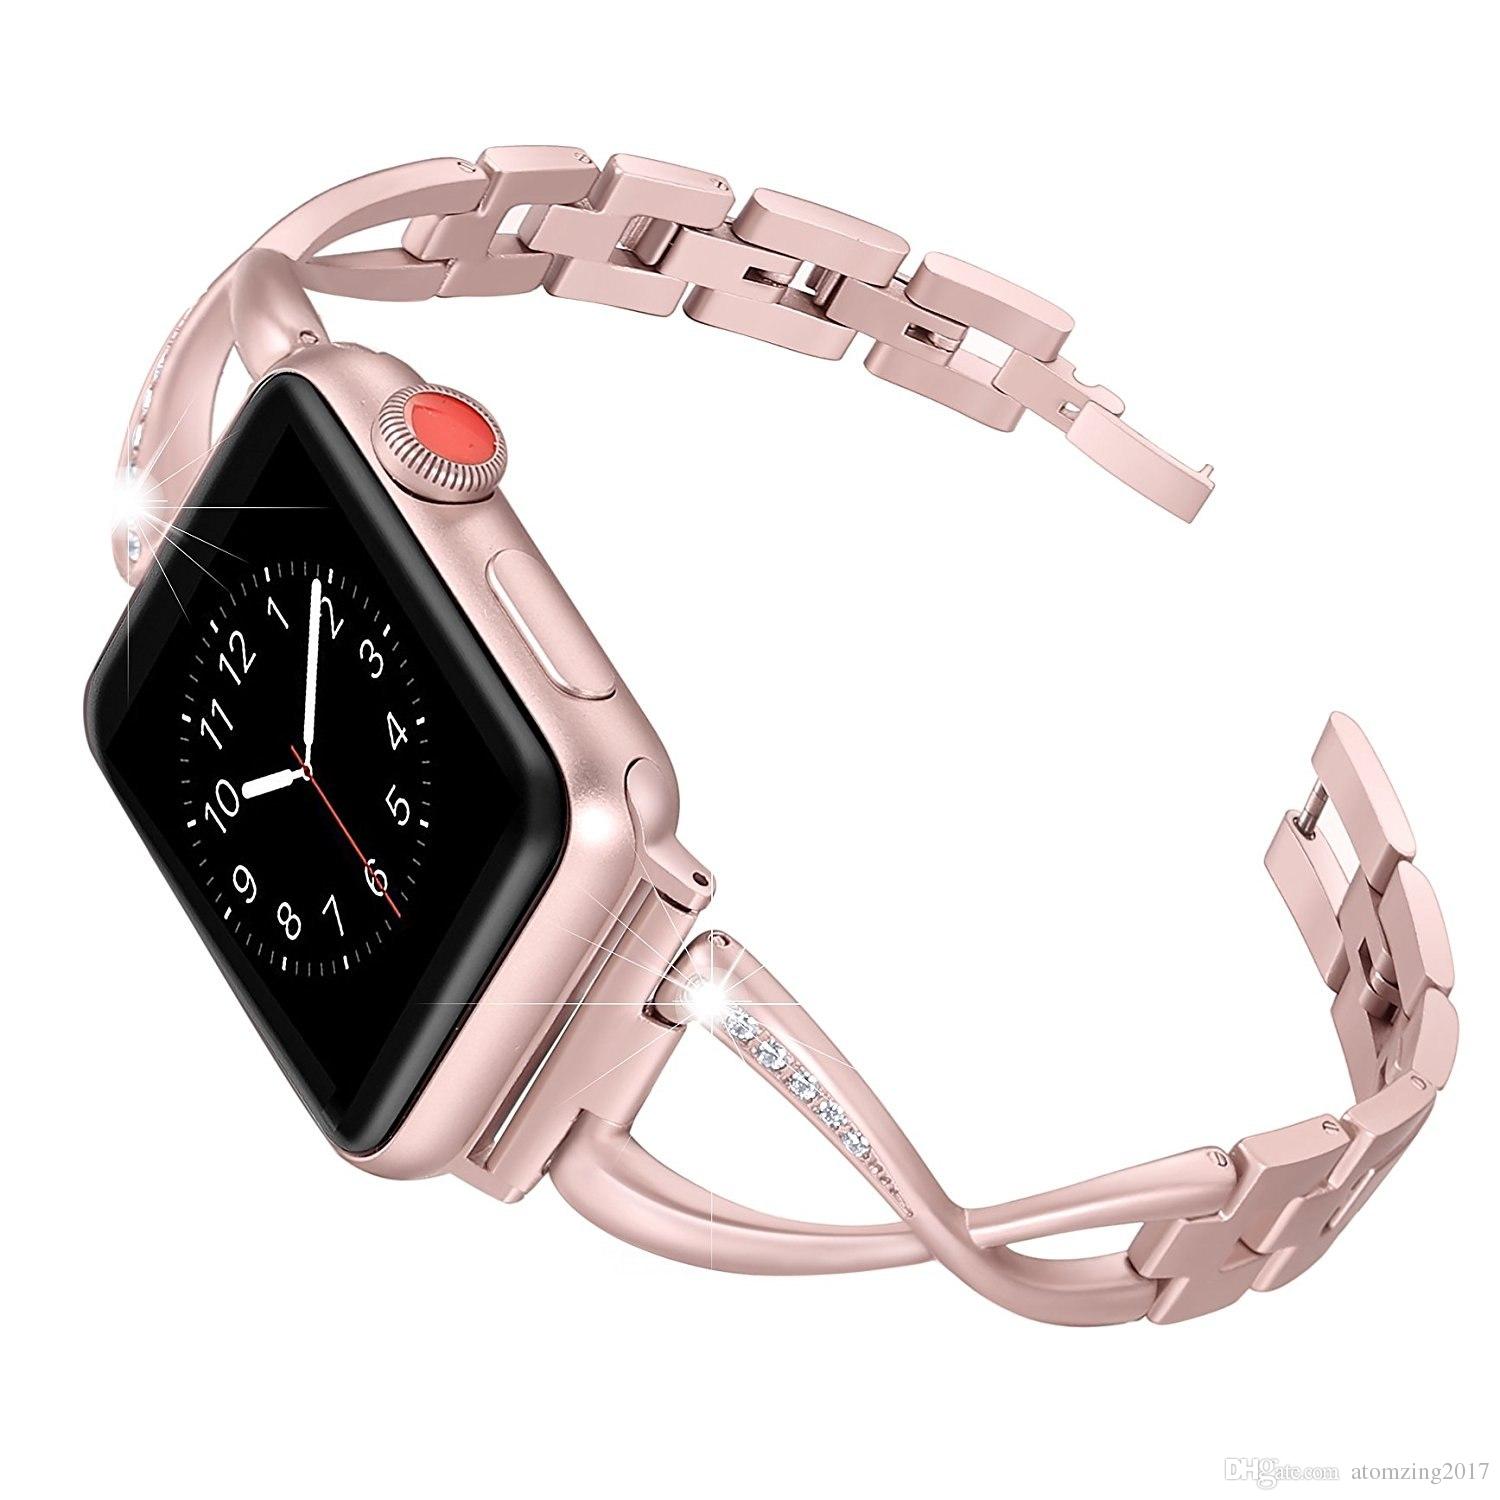 Women Watch band for Apple Watch Bands 38mm/42mm diamond Stainless Steel Strap for iwatch series 3 2 1 Bracelet